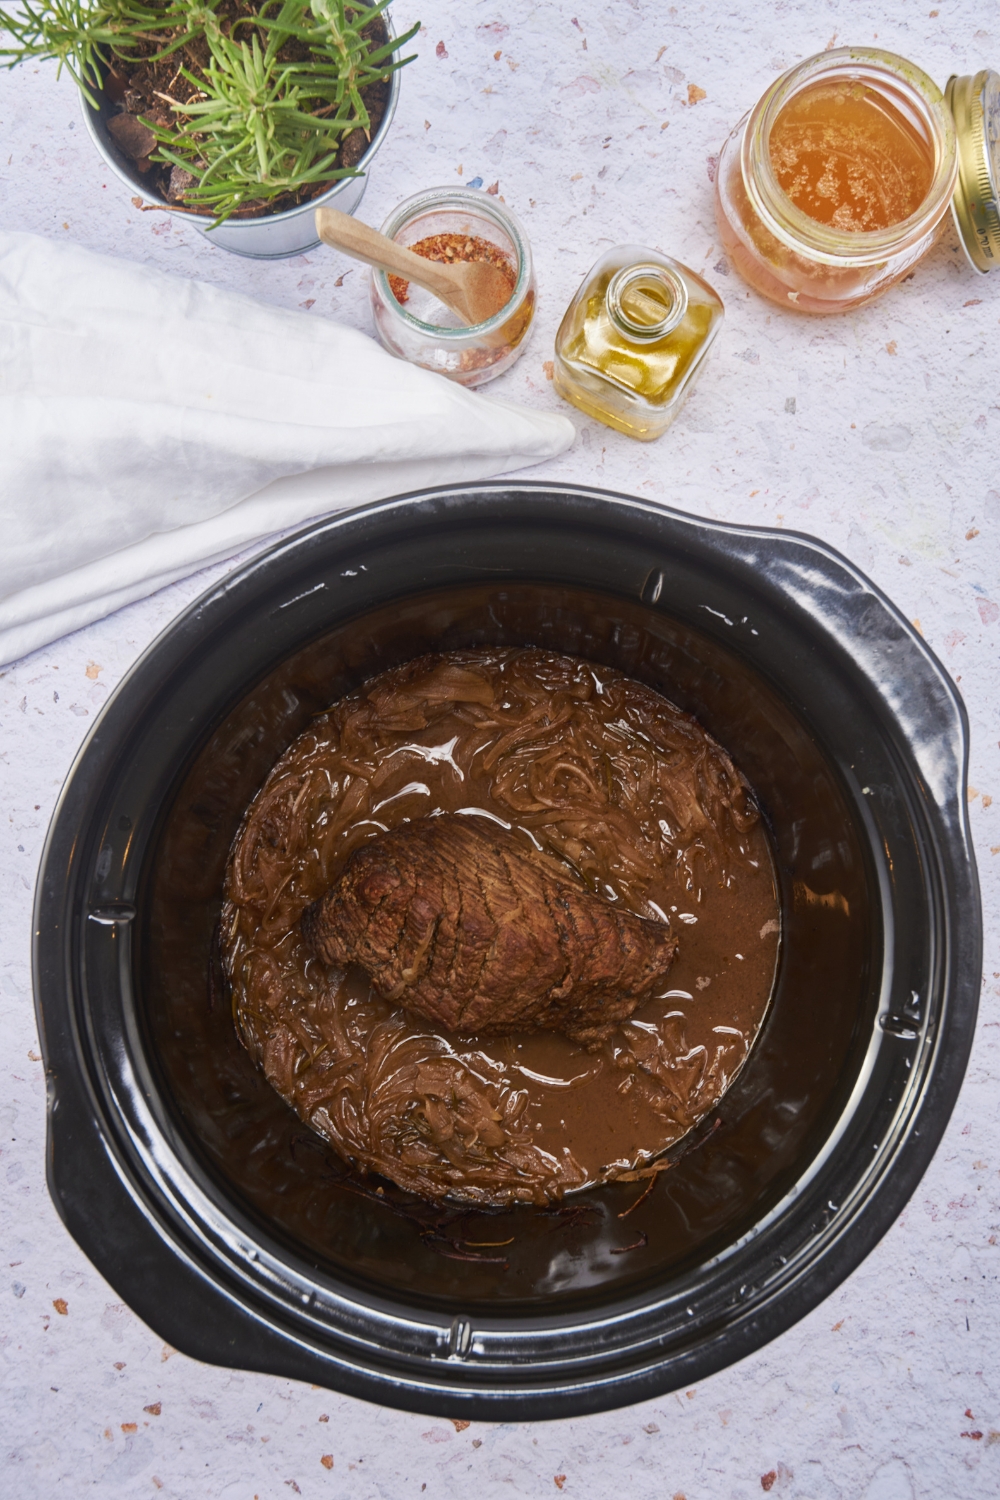 A black crockpot filled with cooked steak, a brown gravy, and cooked onions.